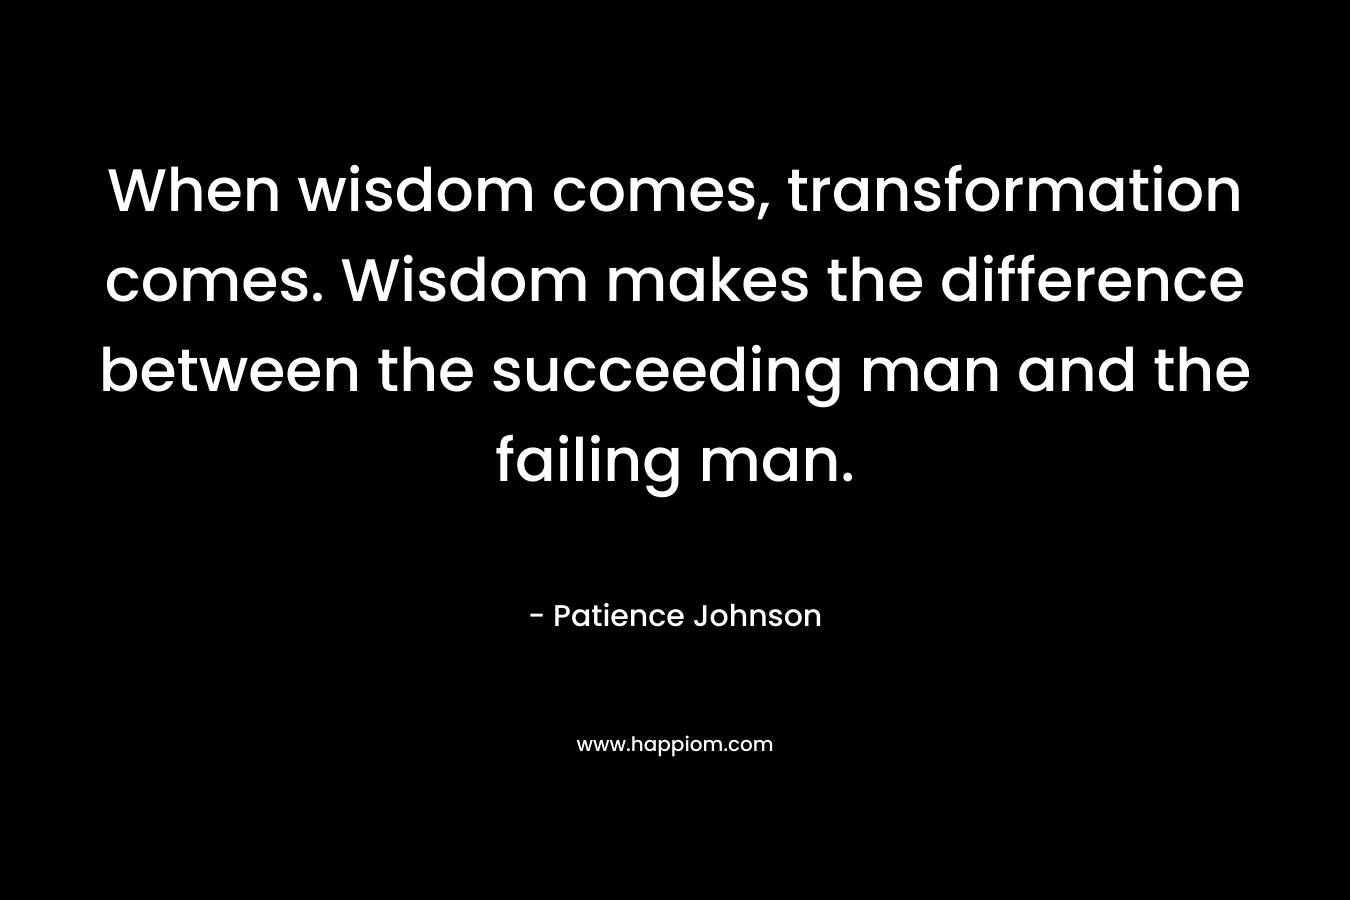 When wisdom comes, transformation comes. Wisdom makes the difference between the succeeding man and the failing man.